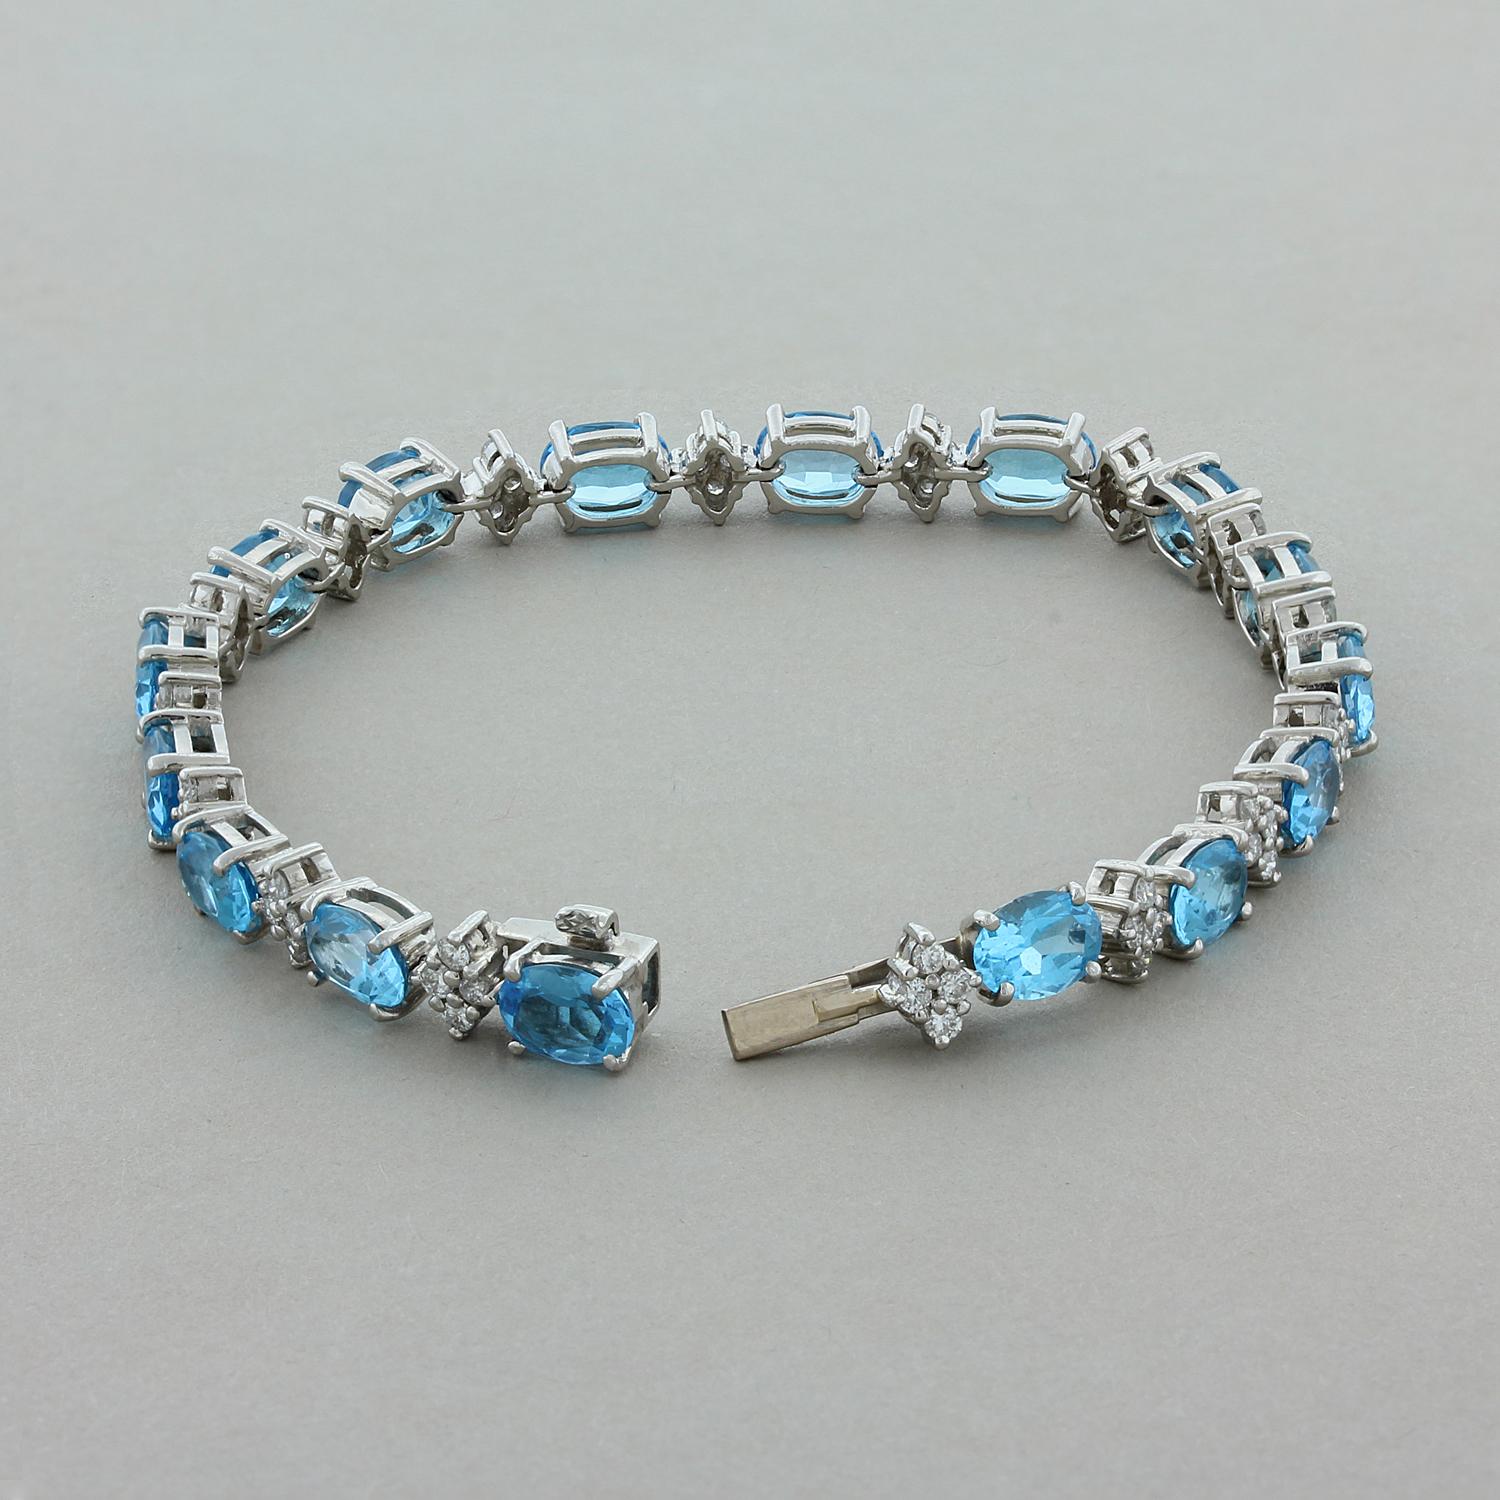 A gorgeous bracelet featuring 14.95 carats of ocean blue topaz. The oval cut blue topaz are linked with 1.30 carats of alternating diamond clusters. Set in platinum with a box clasp closure and a hidden safety latch underneath the bracelet for a